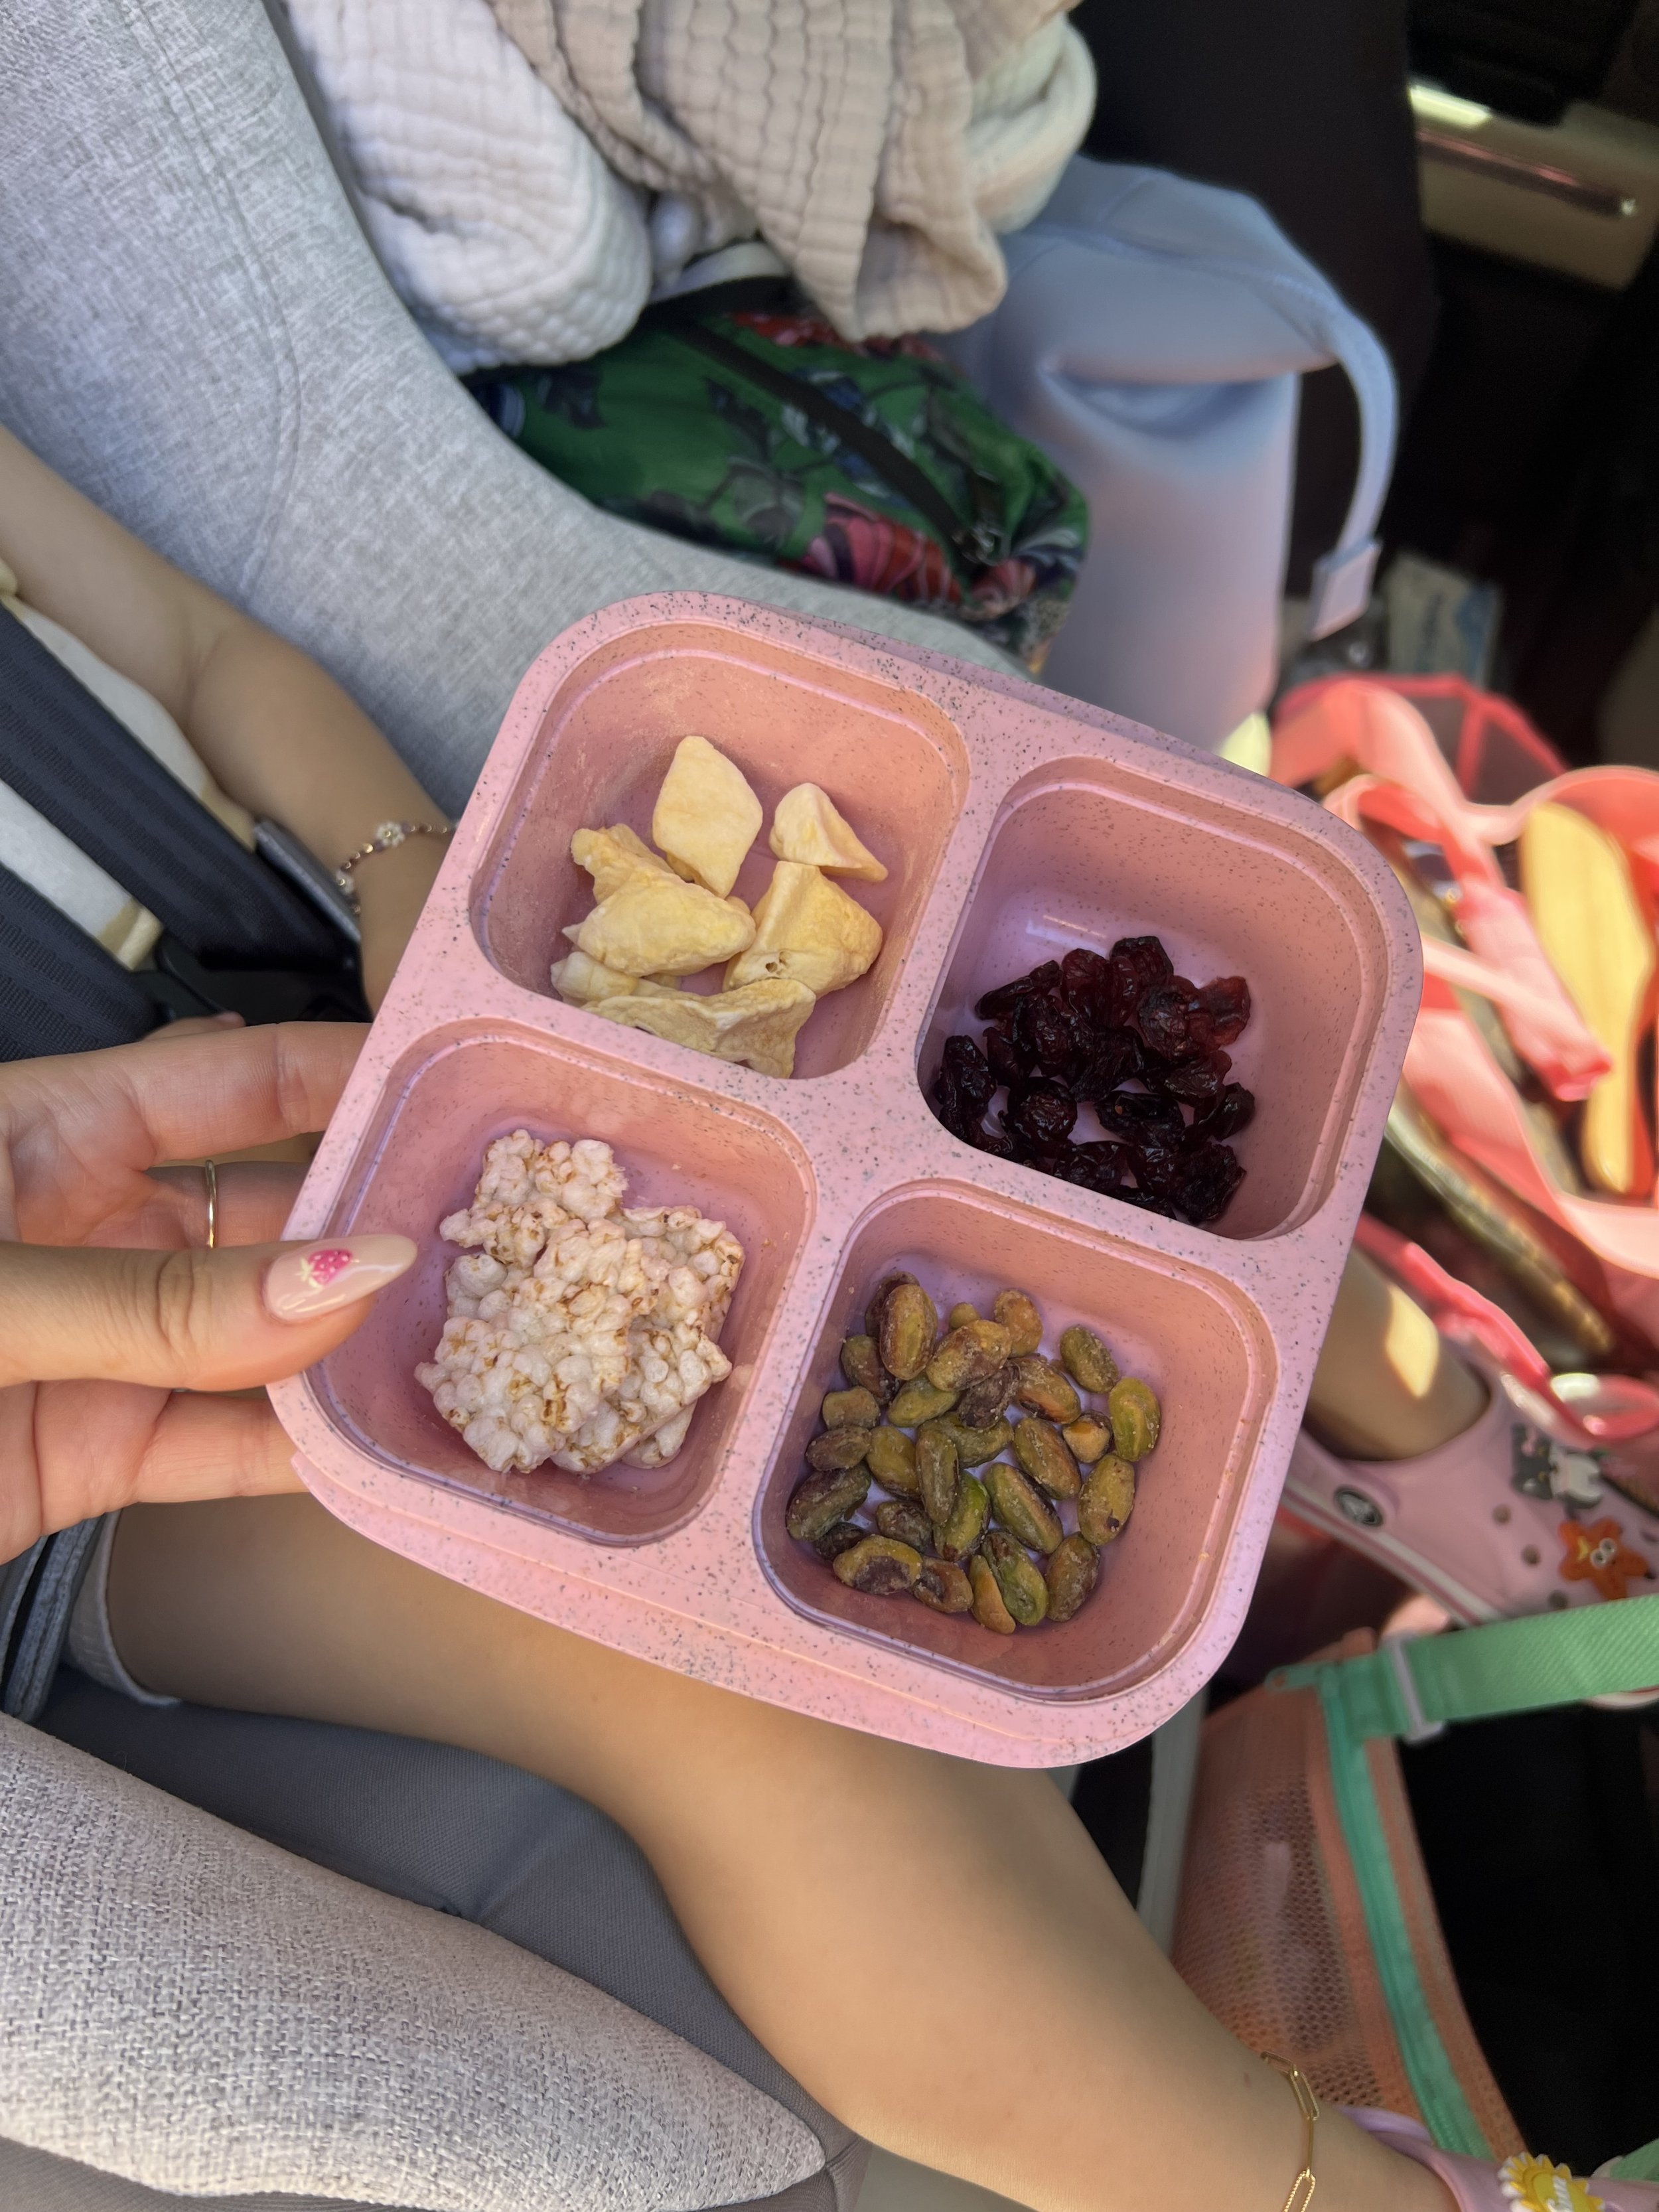 Toddler Snack Must Haves - Amazon Snack Tray - Toddler Snack Faves - bresheppard.com.jpg